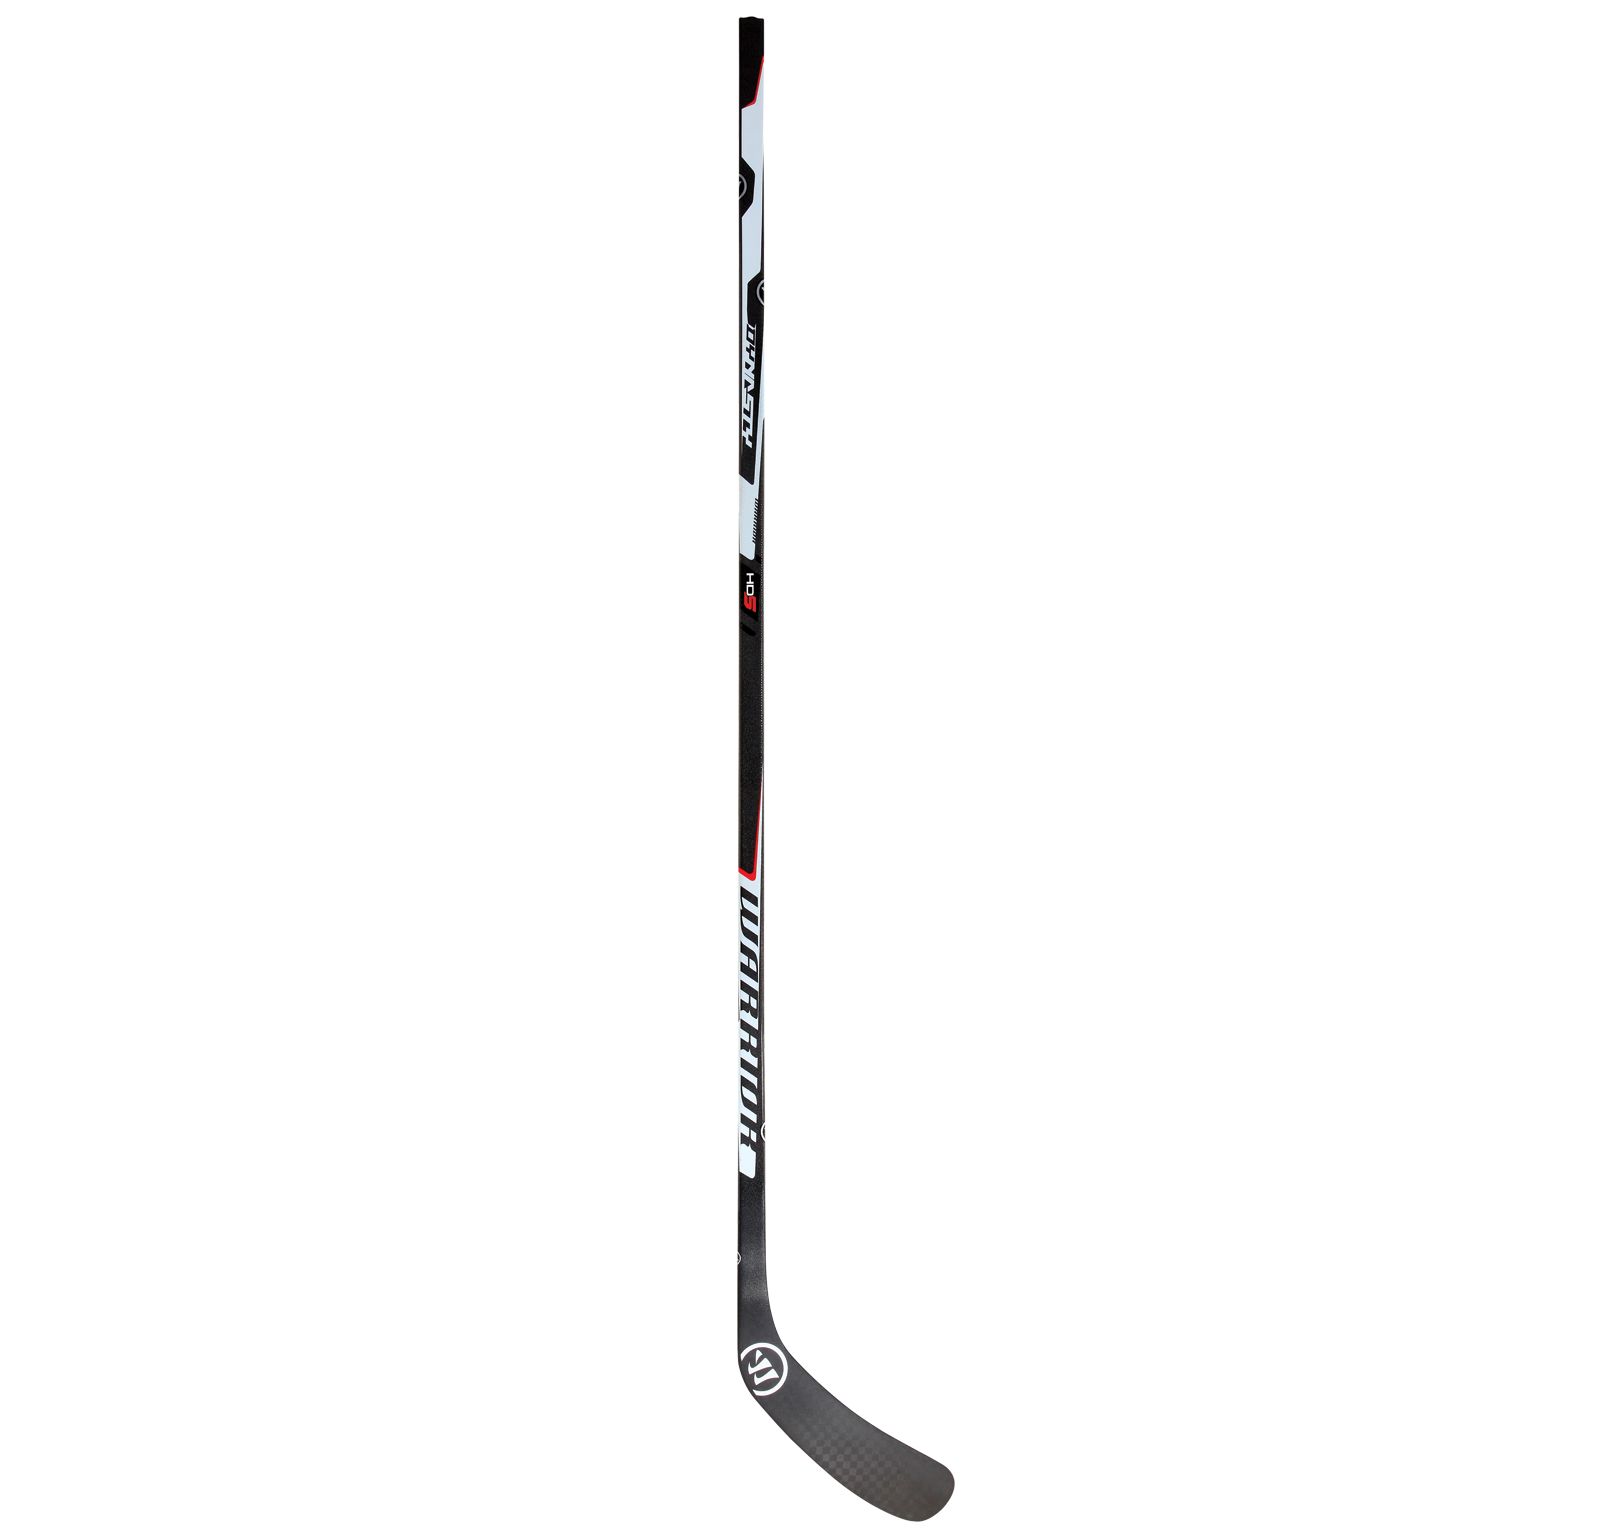 DYNASTY HD5 SENIOR GRIP HOCKEY STICK, Black with Red & White image number 1